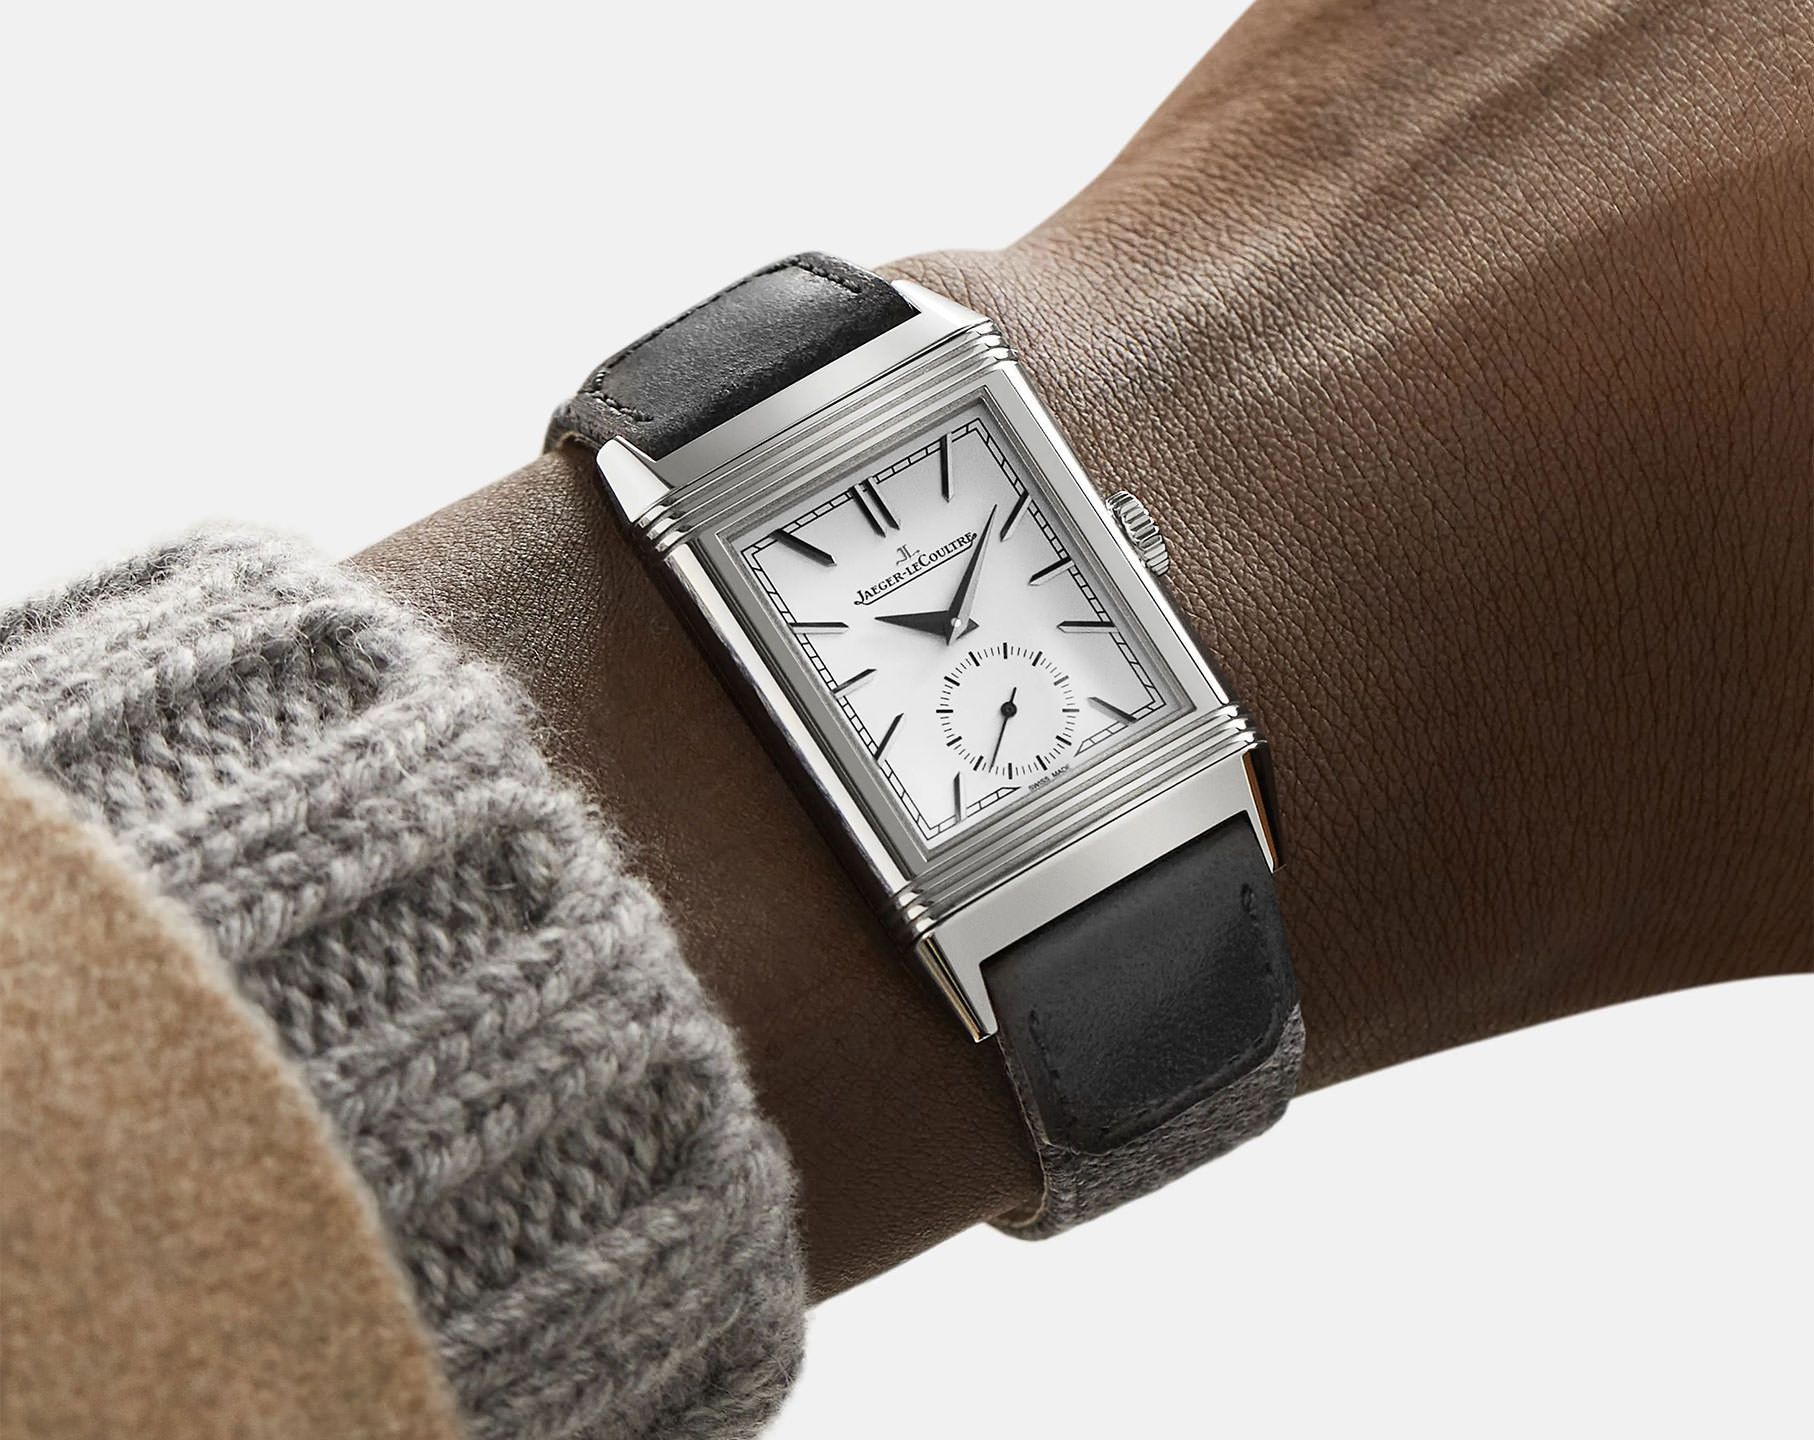 Jaeger-LeCoultre Reverso Tribute 27.4 mm Watch in Silver Dial